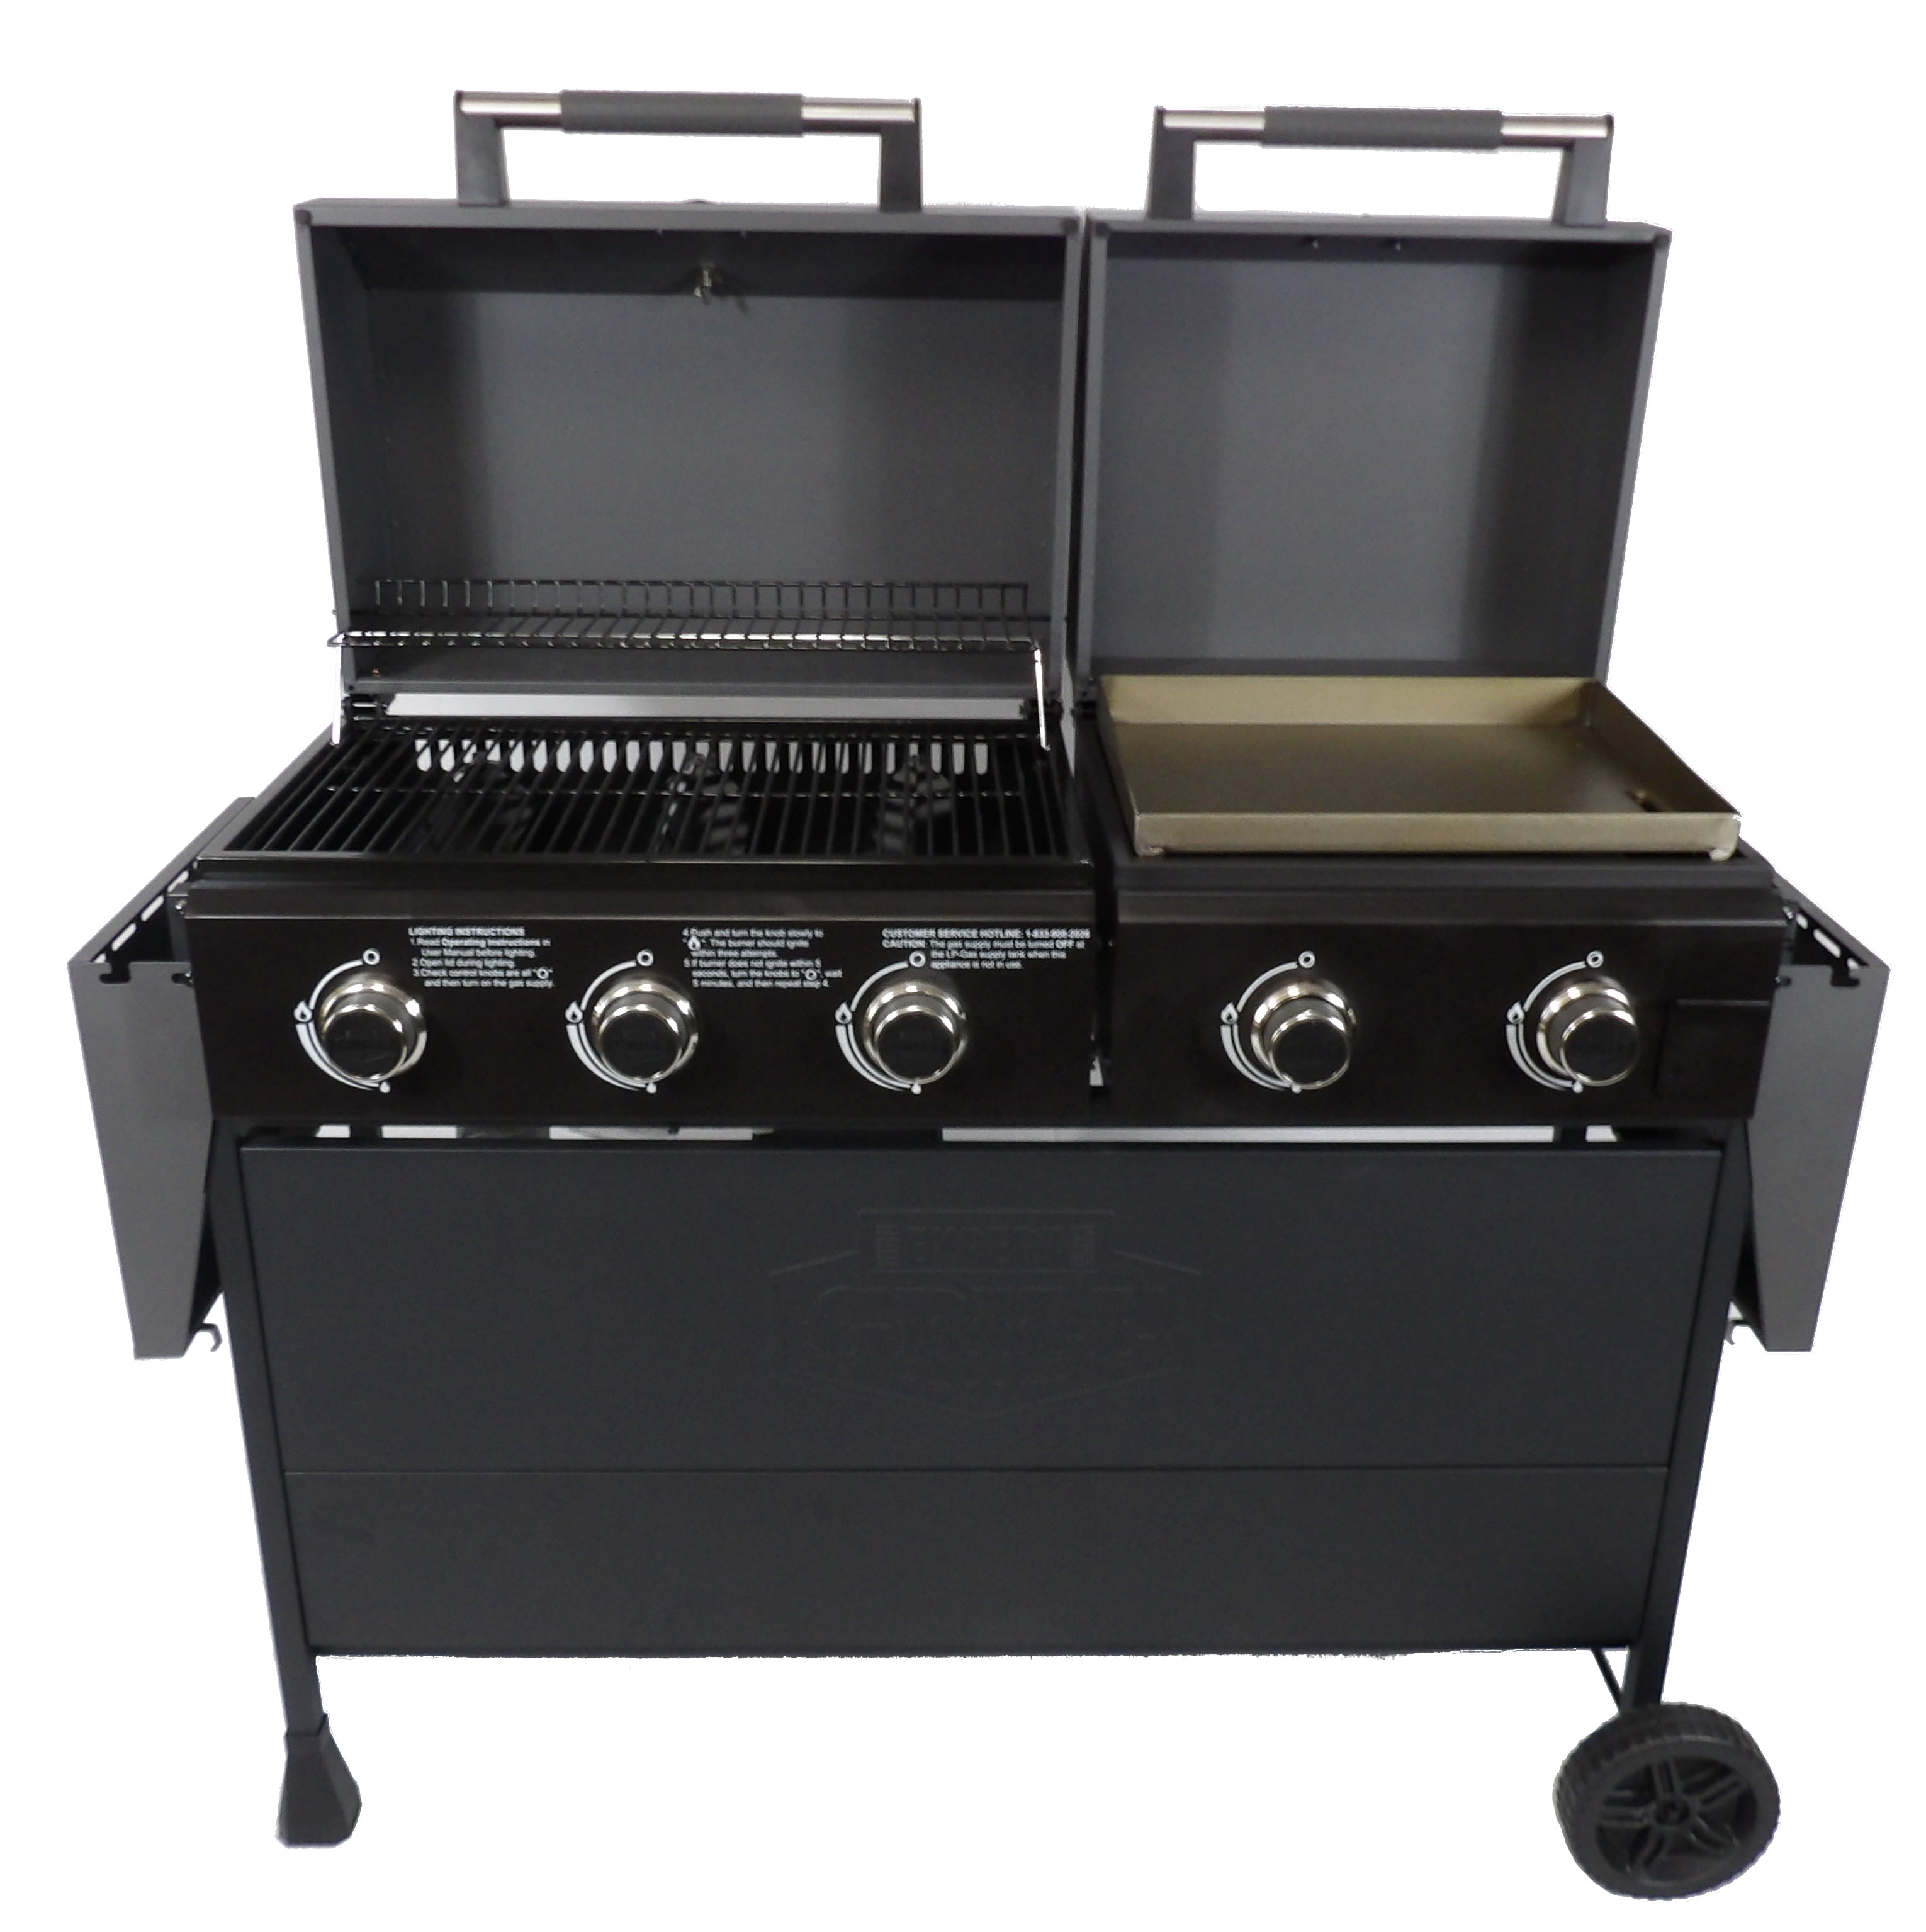 Combo Grill and Griddle - Walmart.com